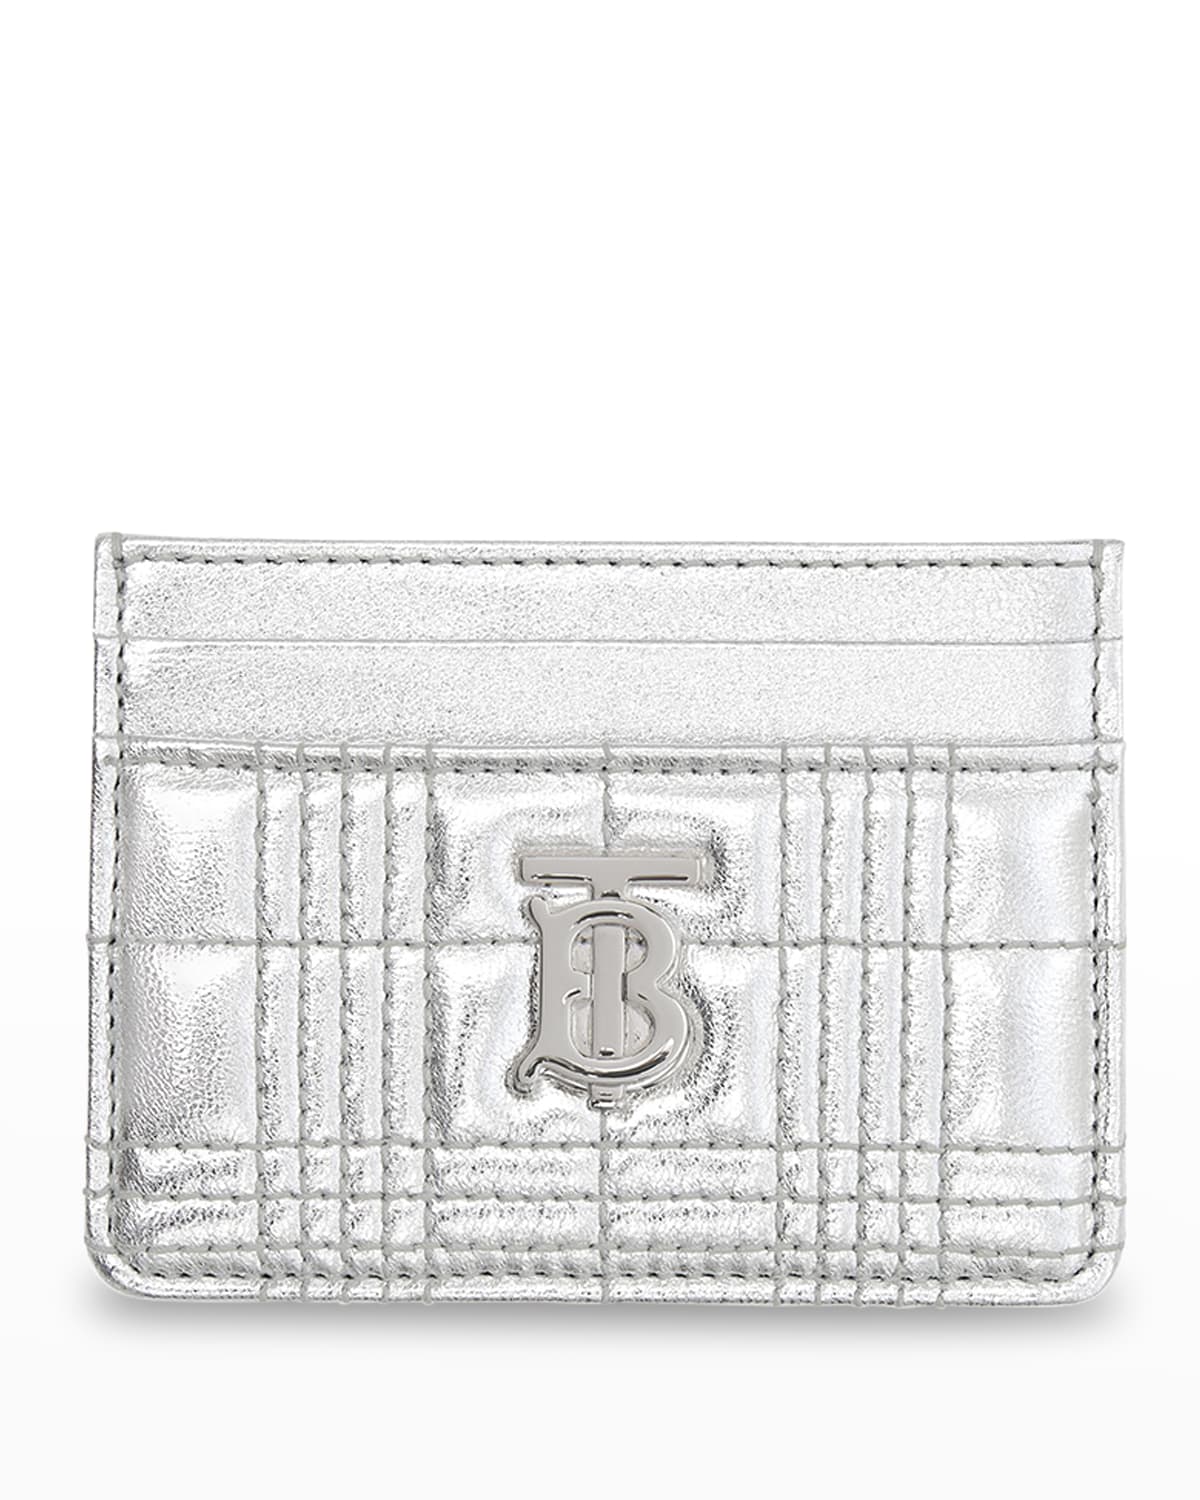 Burberry Lola TB Quilted Metallic Leather Card Case